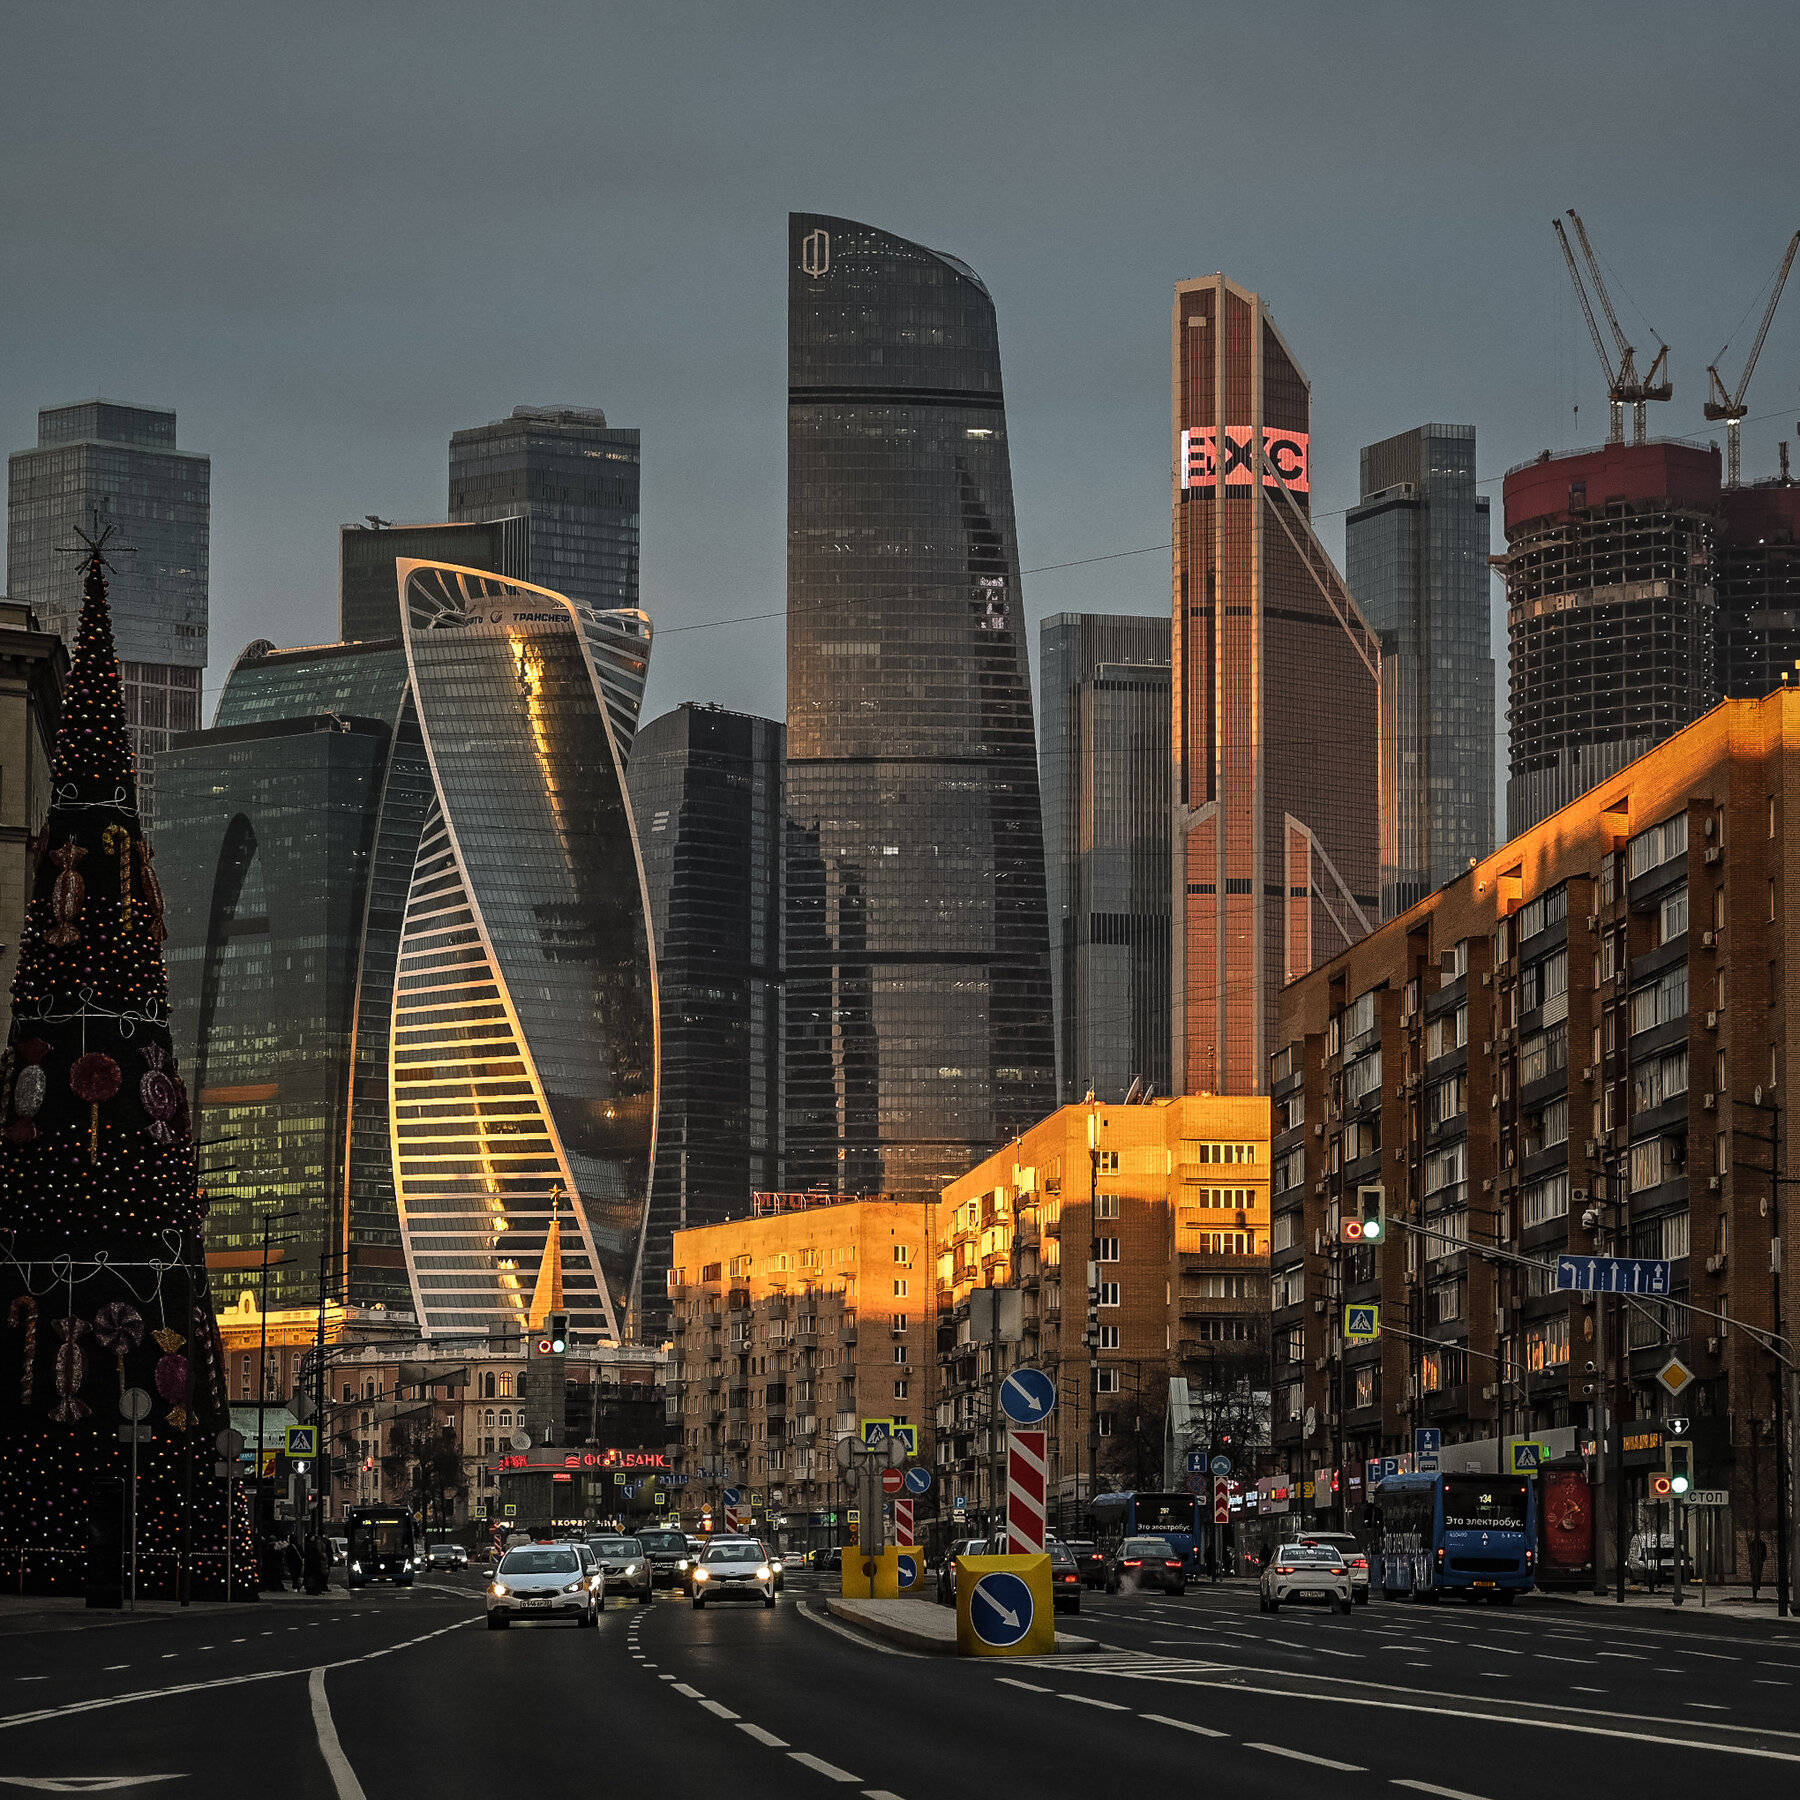 Moscow Russia Skyscrapers Street View Background